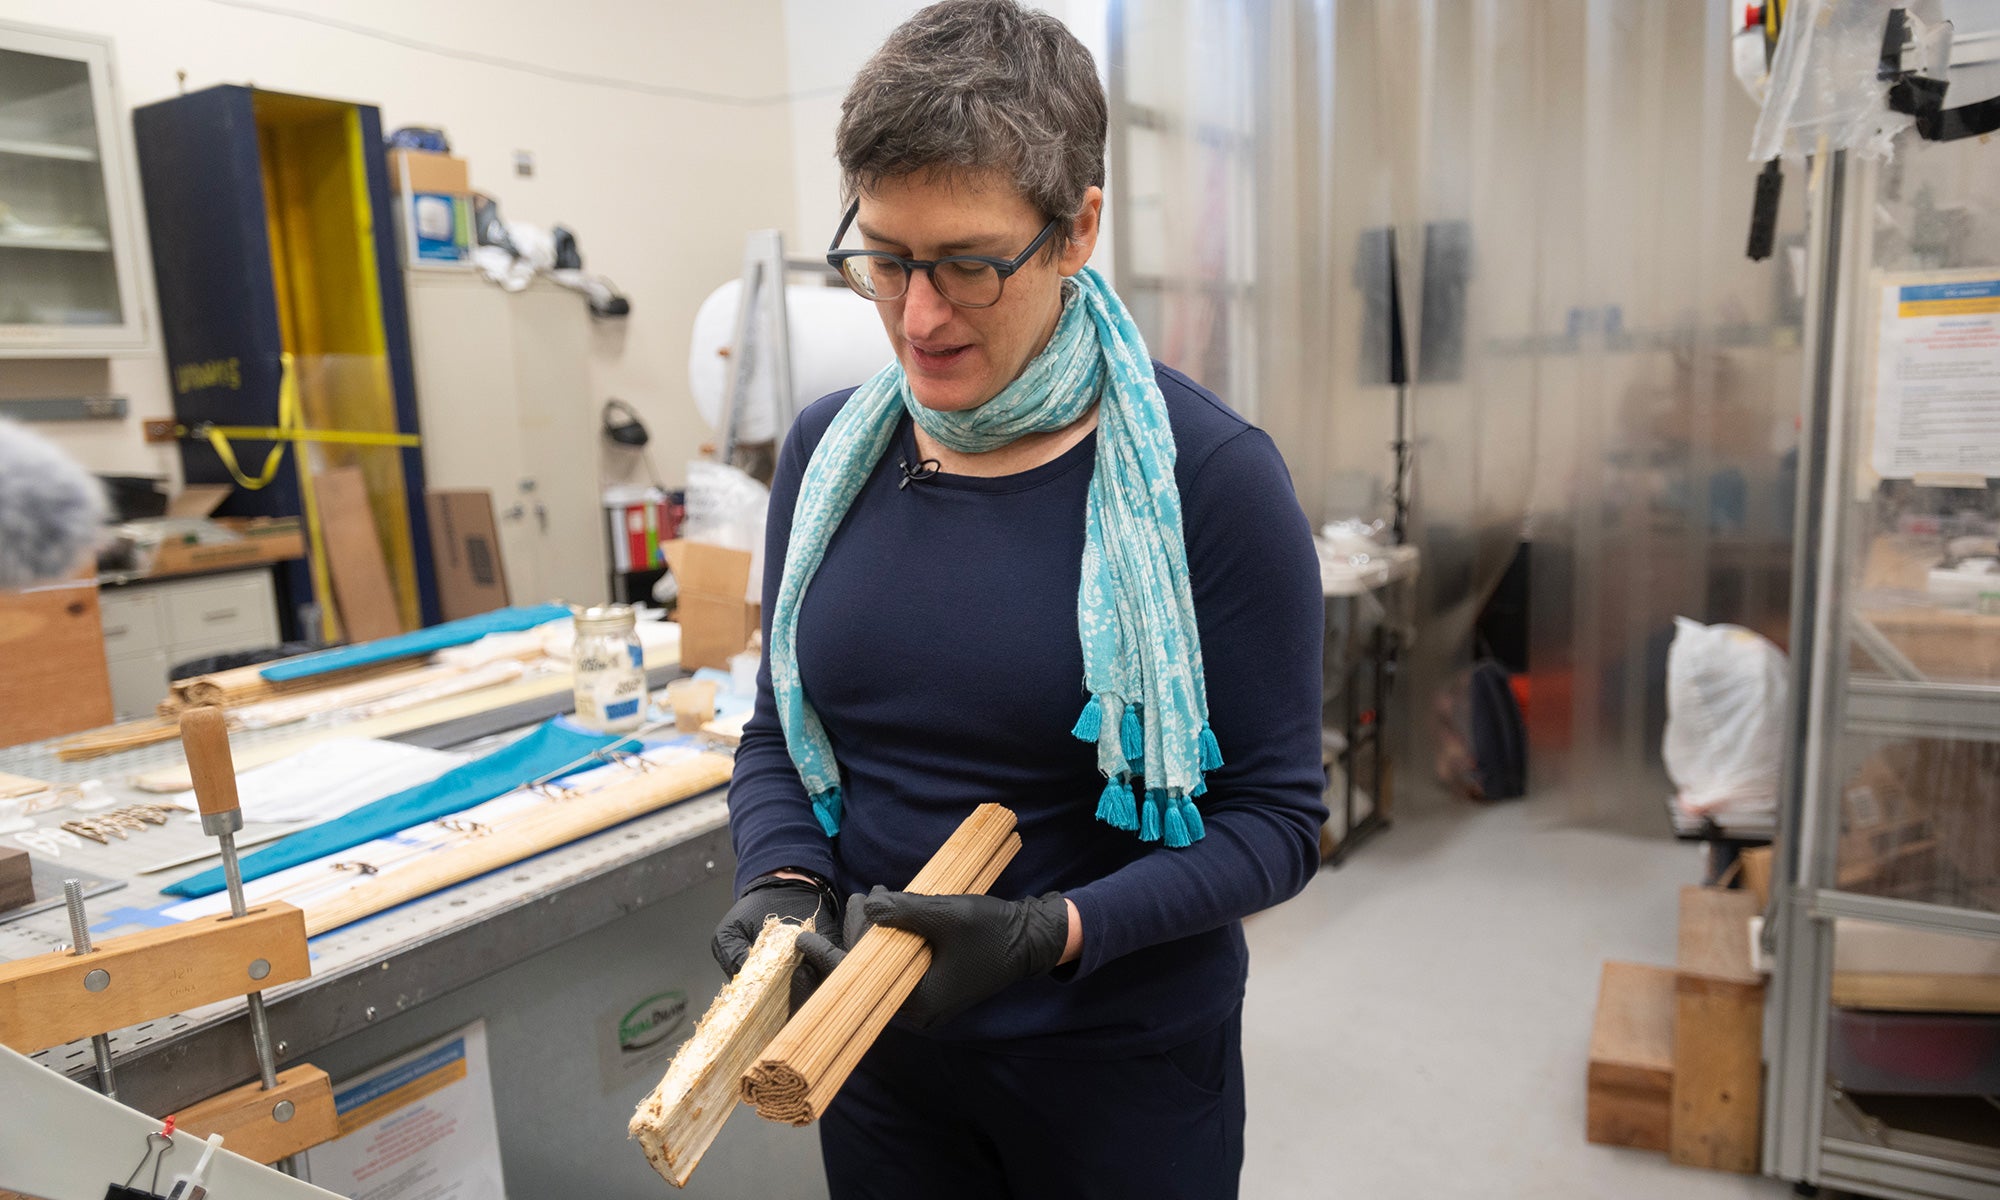 Valeria La Saponara holds materials for a compostable wind turbine in the lab